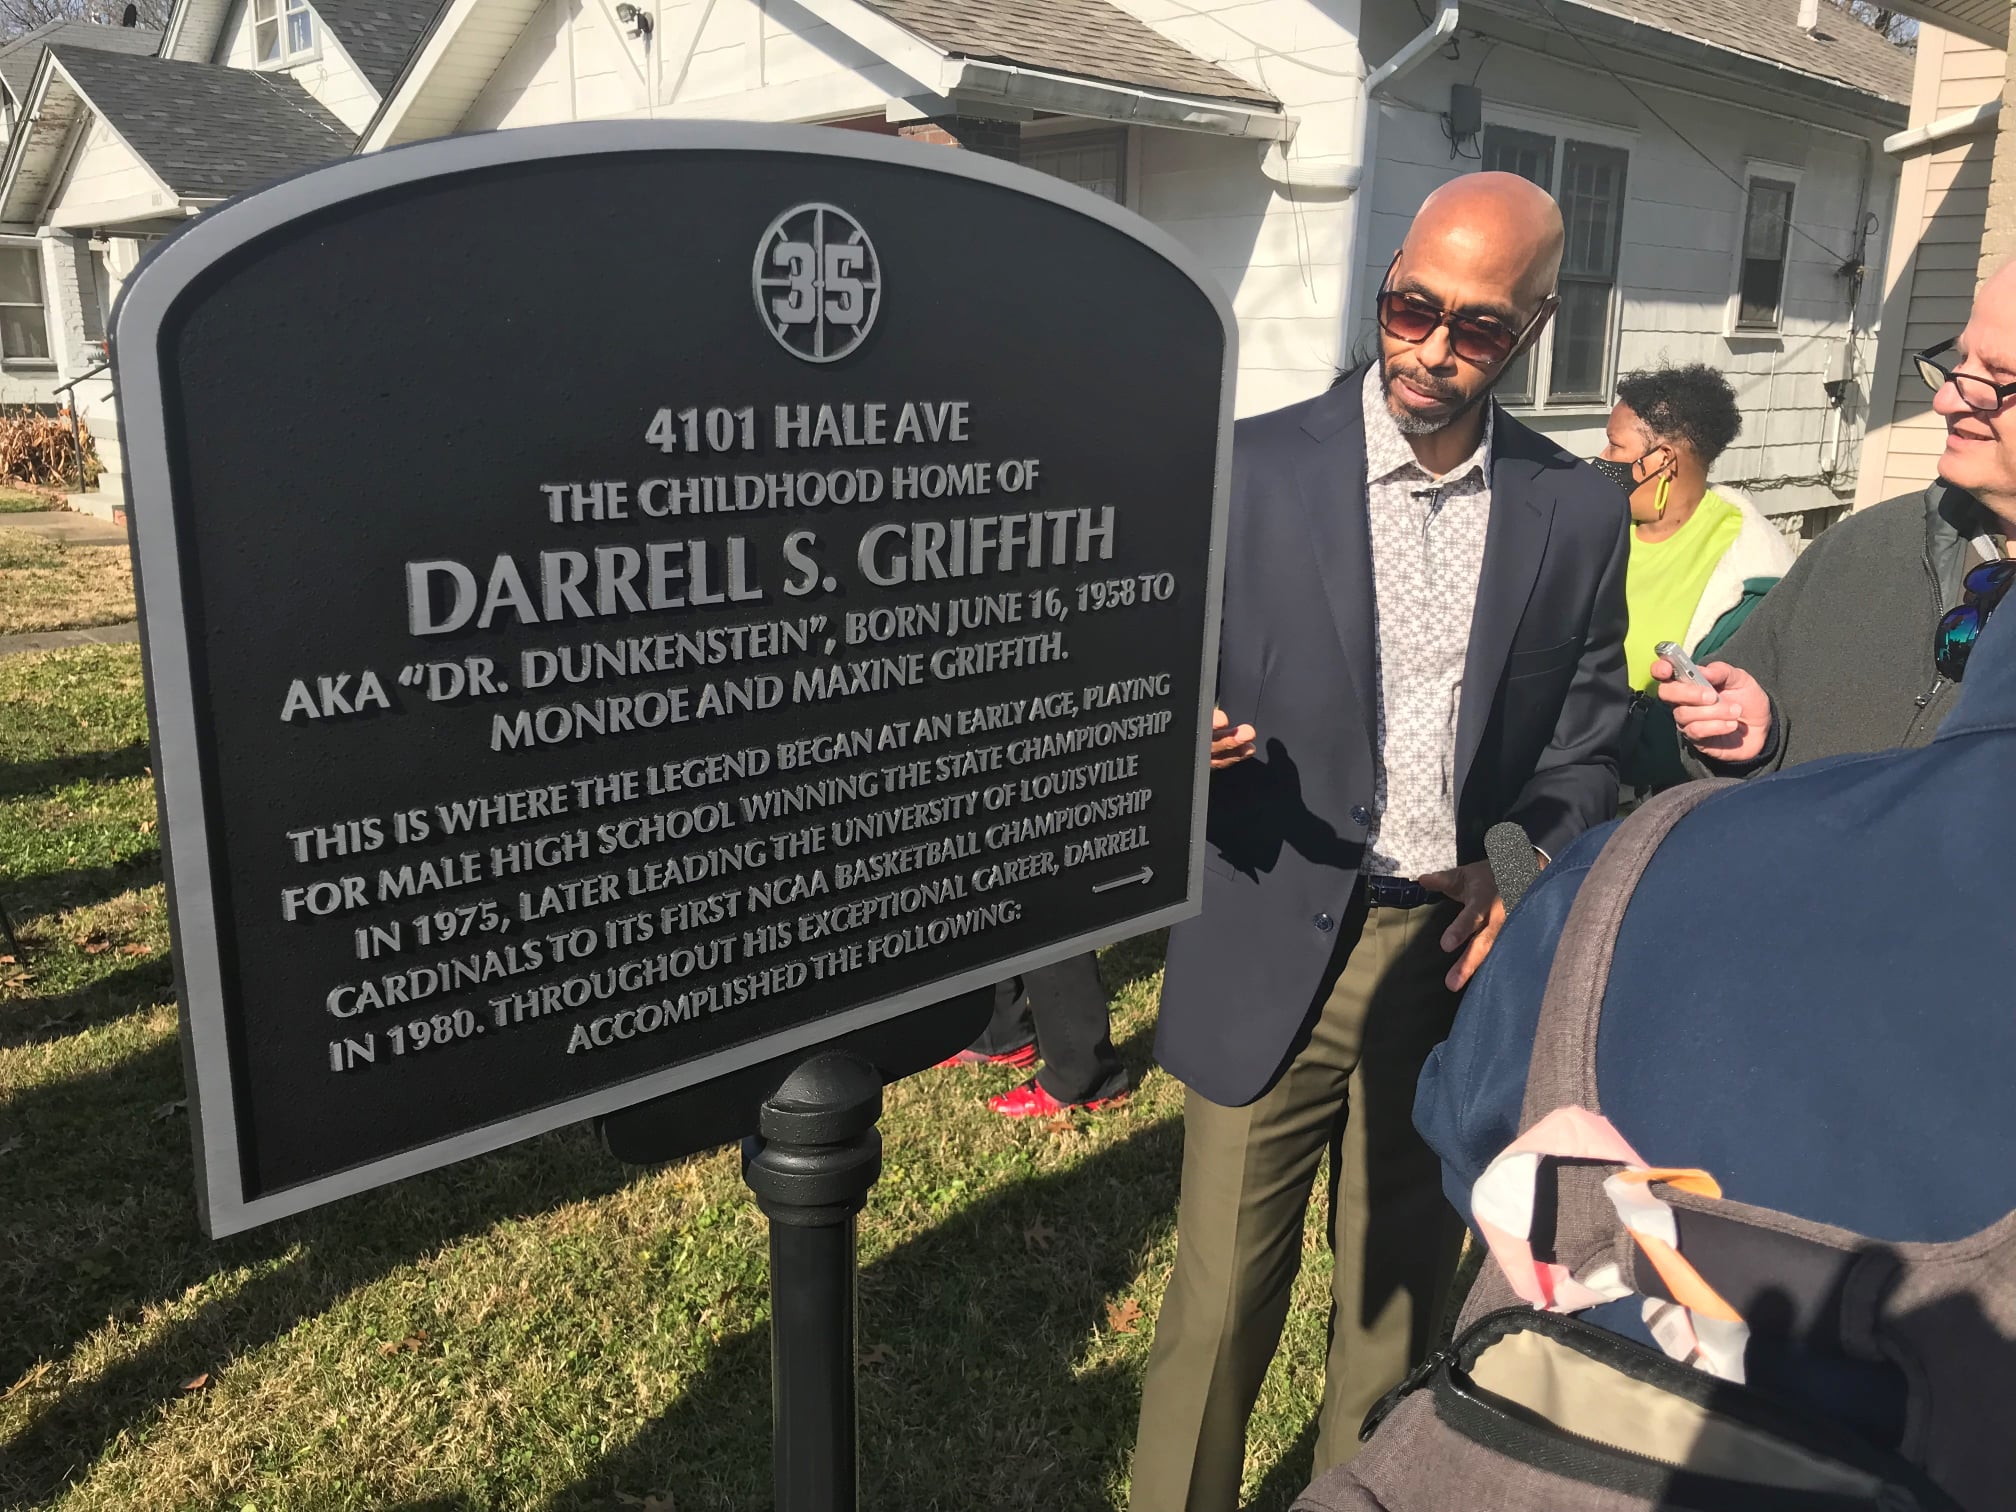 City of Louisville names a street after UofL Basketball legend Darrell Griffith